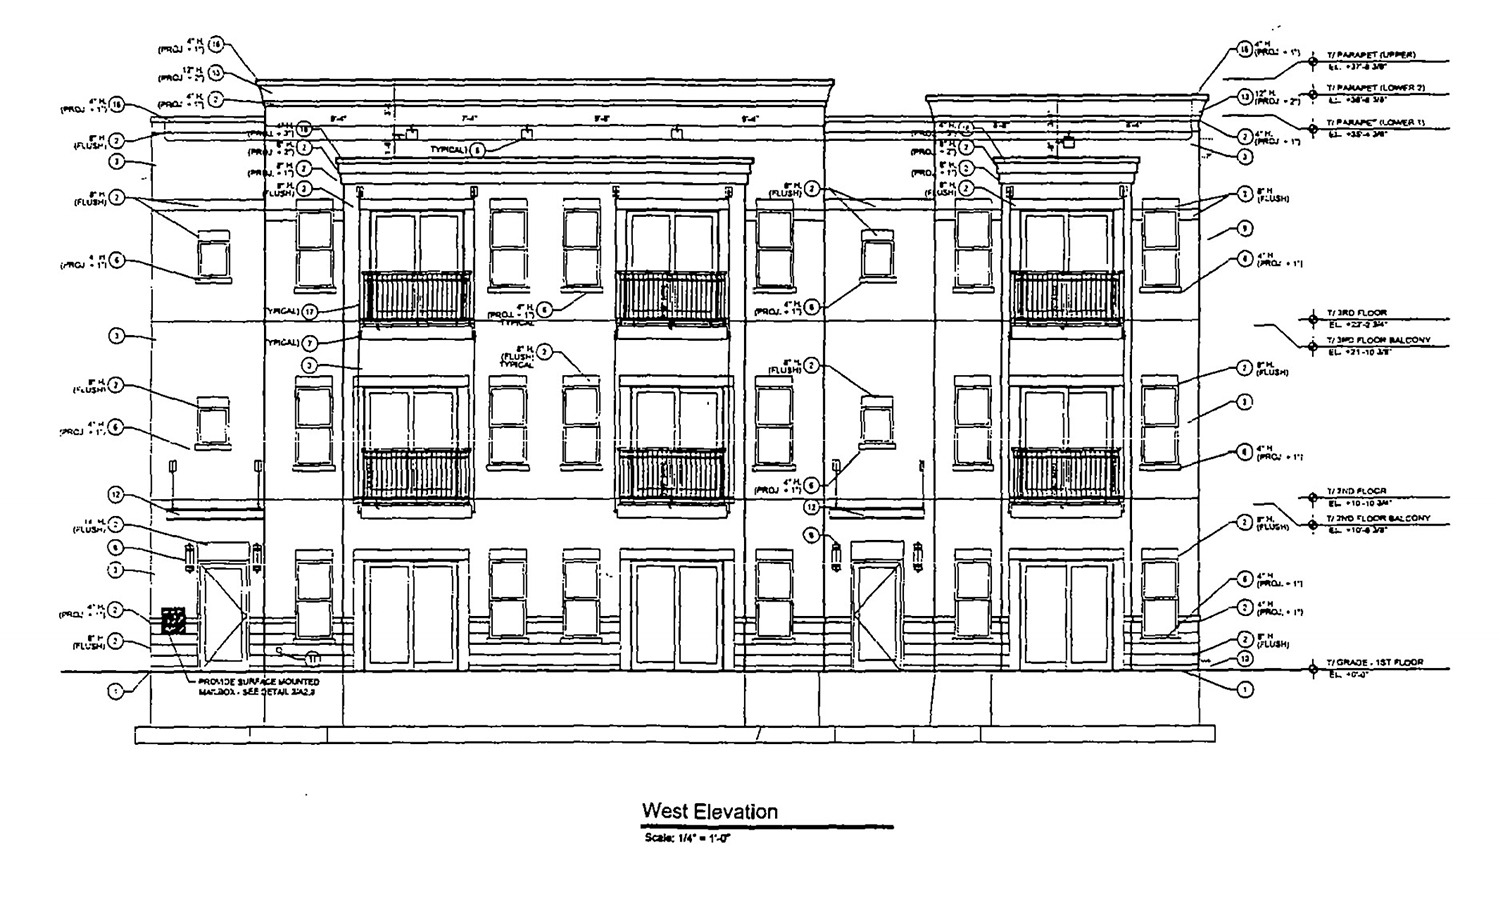 West Elevation for 4416-20 N Austin Avenue. Drawing by Axios Architects and Consultants